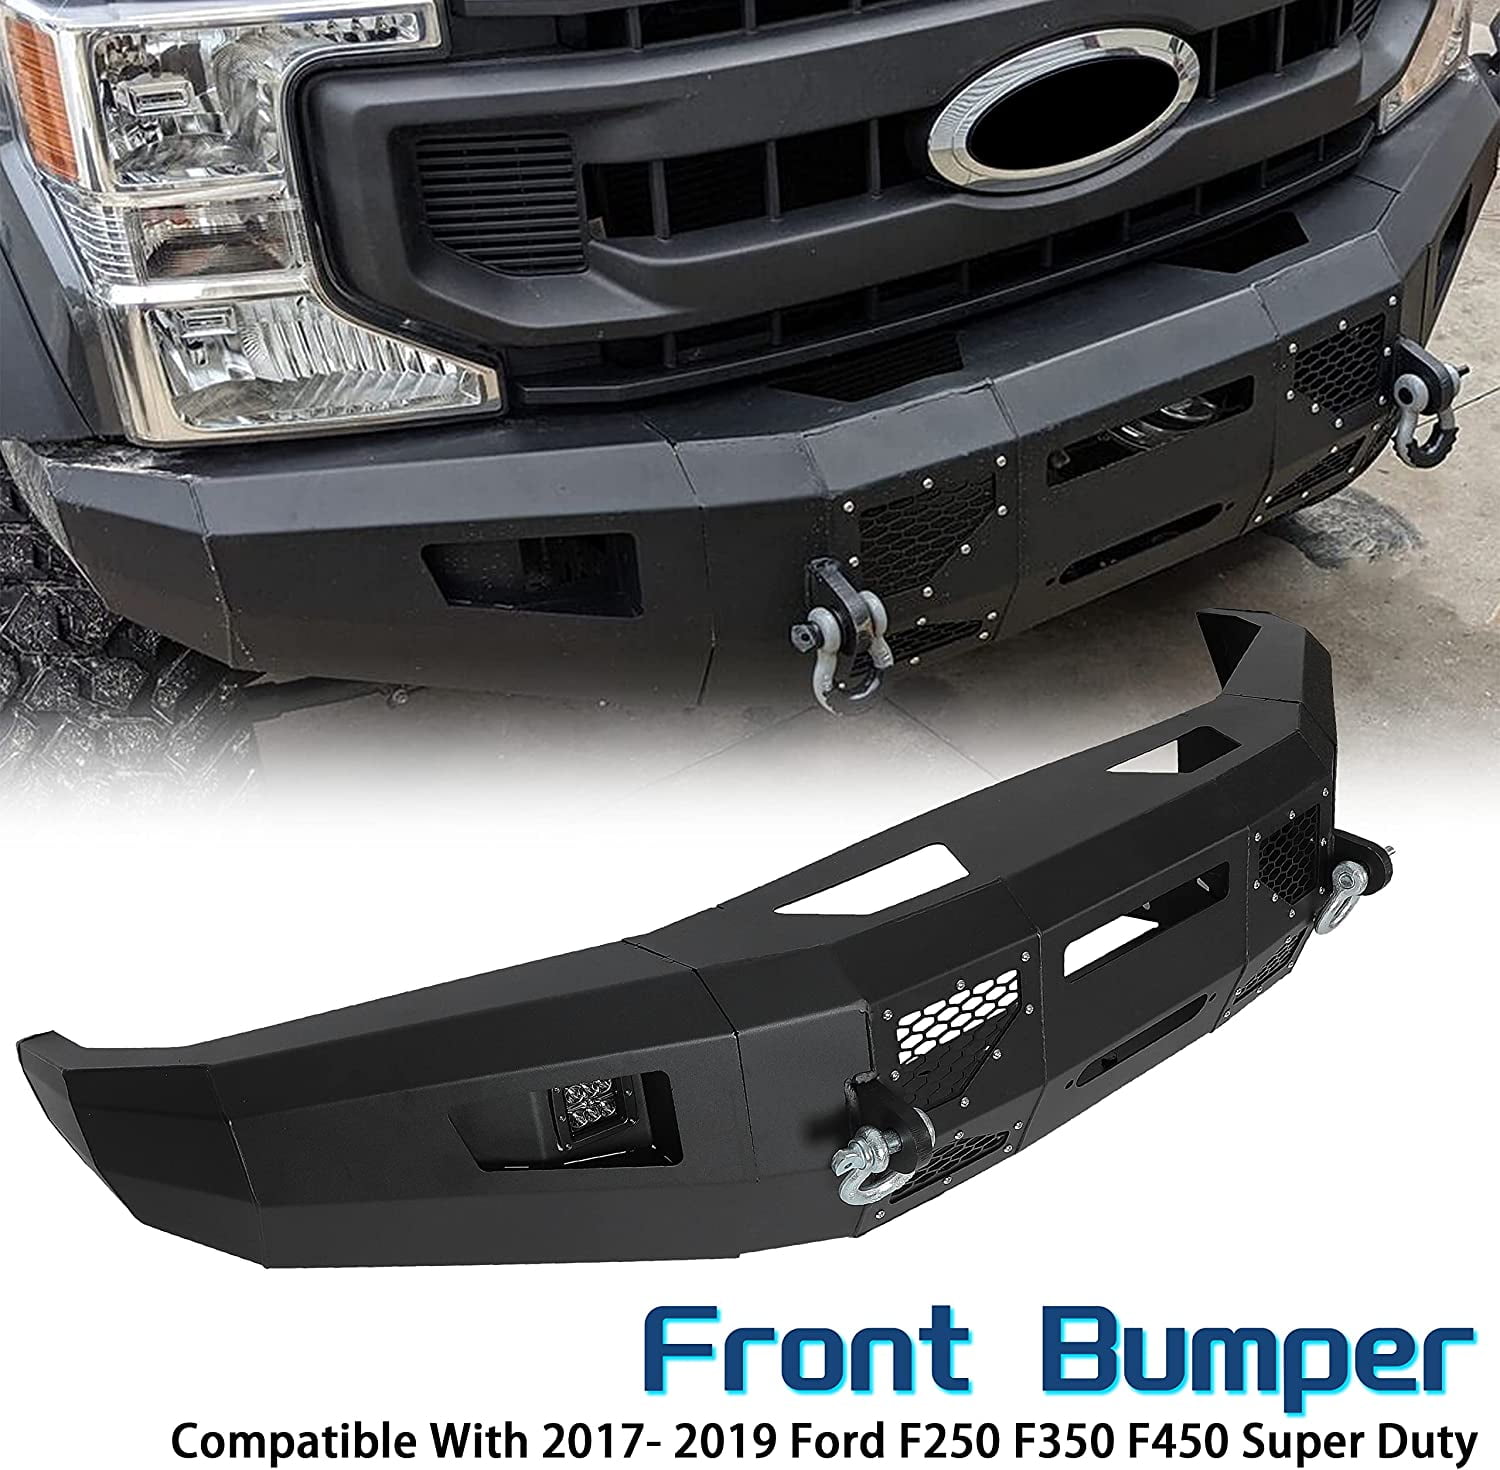 You will receive 2 packages ECOTRIC Modular Front Bumper 3-Piece w/LED Lights Compatible With 2017 2018 2019 2020 2021 2022 Ford F250 F350 F450 Super Duty 